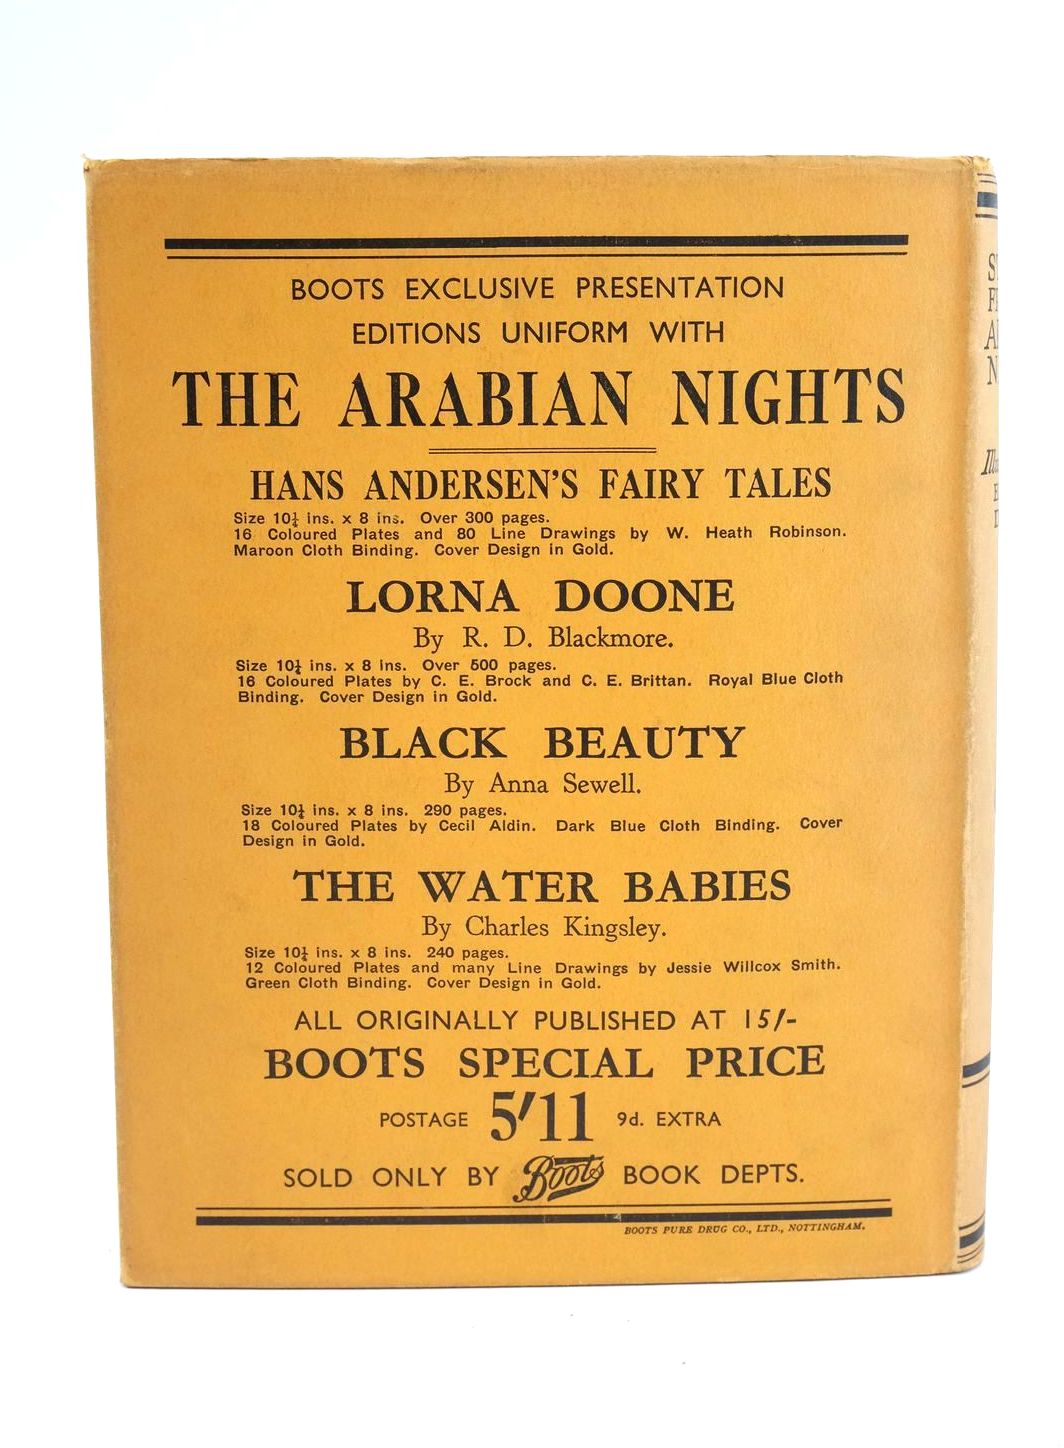 Photo of STORIES FROM THE ARABIAN NIGHTS written by Housman, Laurence illustrated by Dulac, Edmund published by Hodder & Stoughton, Boots the Chemists (STOCK CODE: 1324677)  for sale by Stella & Rose's Books